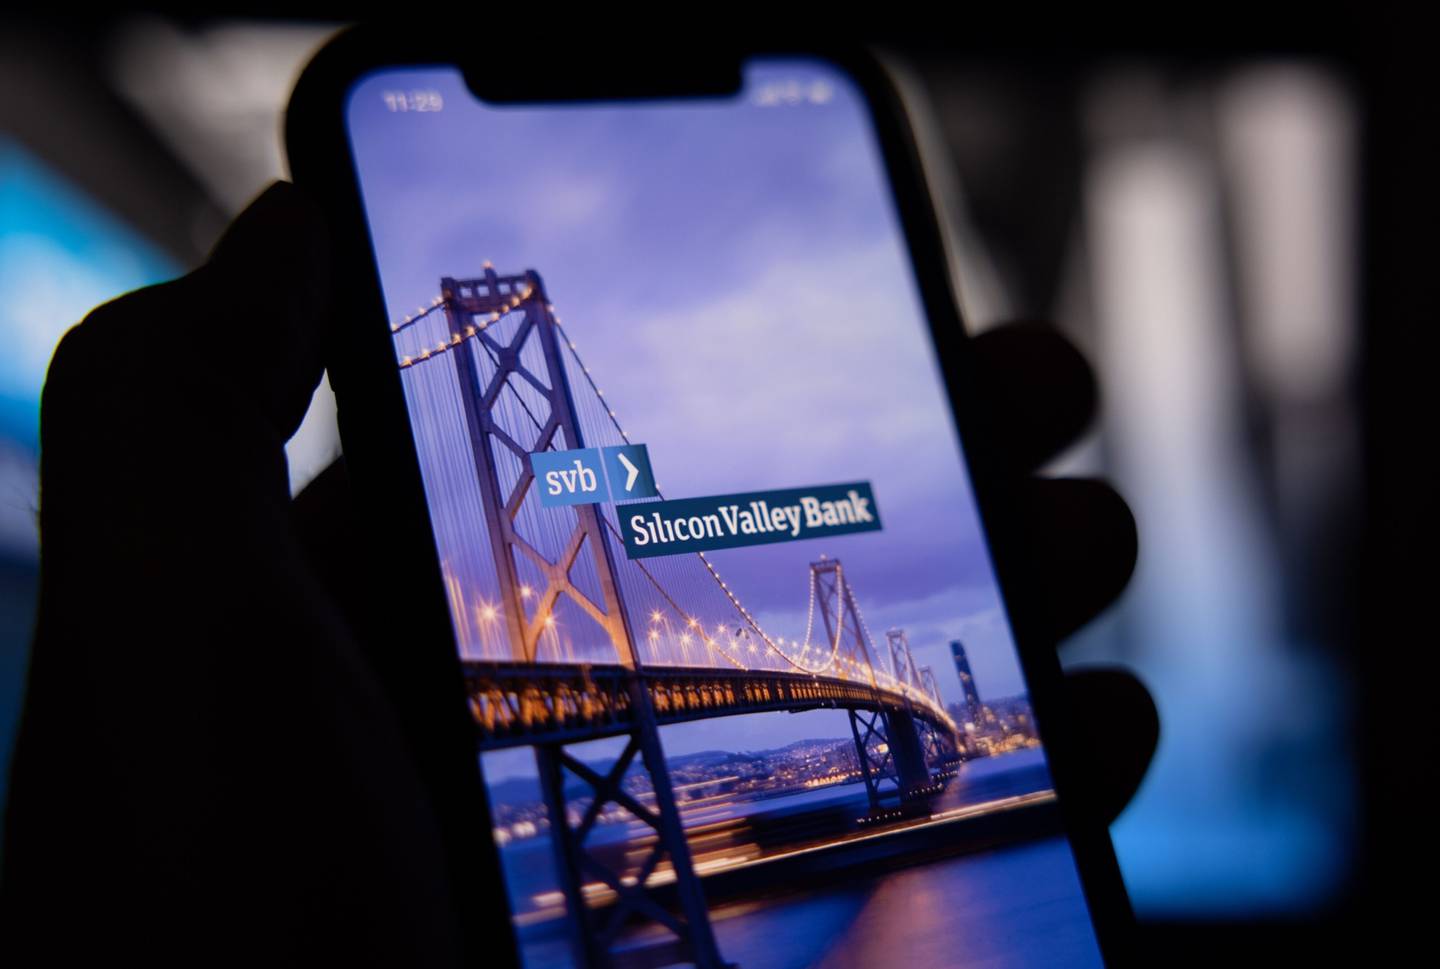 The Silicon Valley Bank logo on a smartphone screen arranged in Riga, Latvia, on Friday, March 10, 2023.